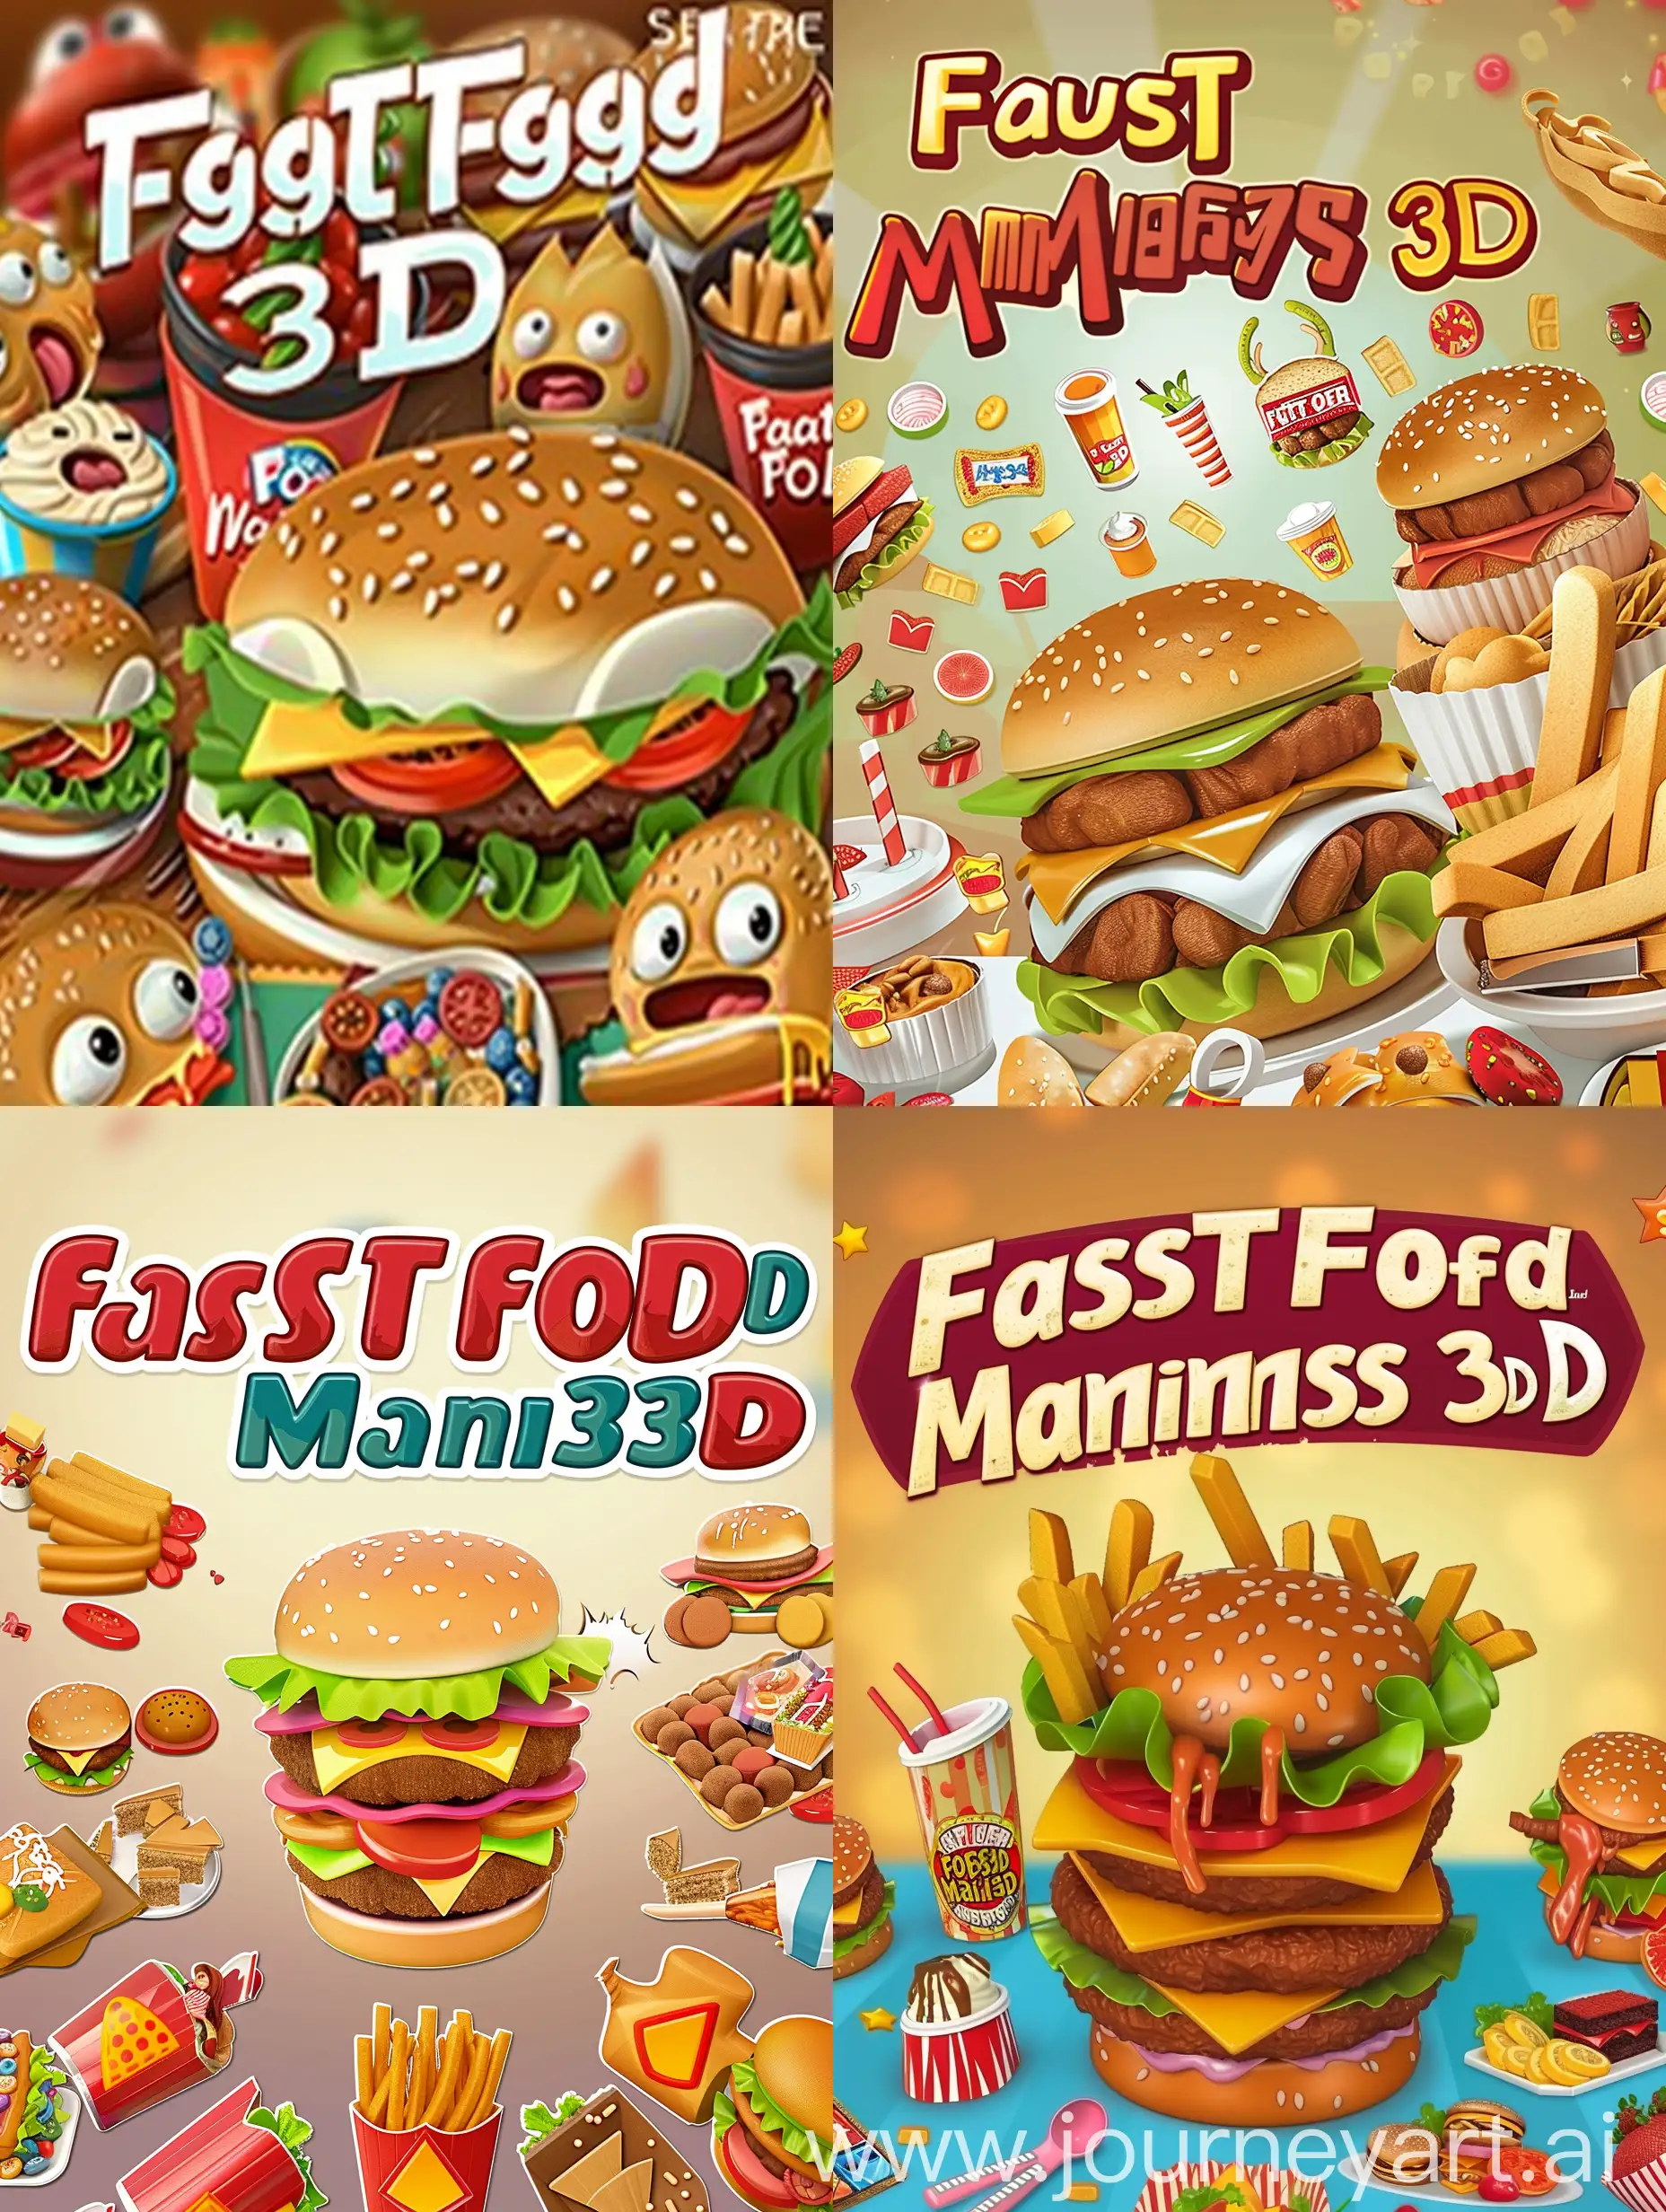 Childrens-Fast-Food-Match-3-Game-Fast-Food-Mania-3D-Cover